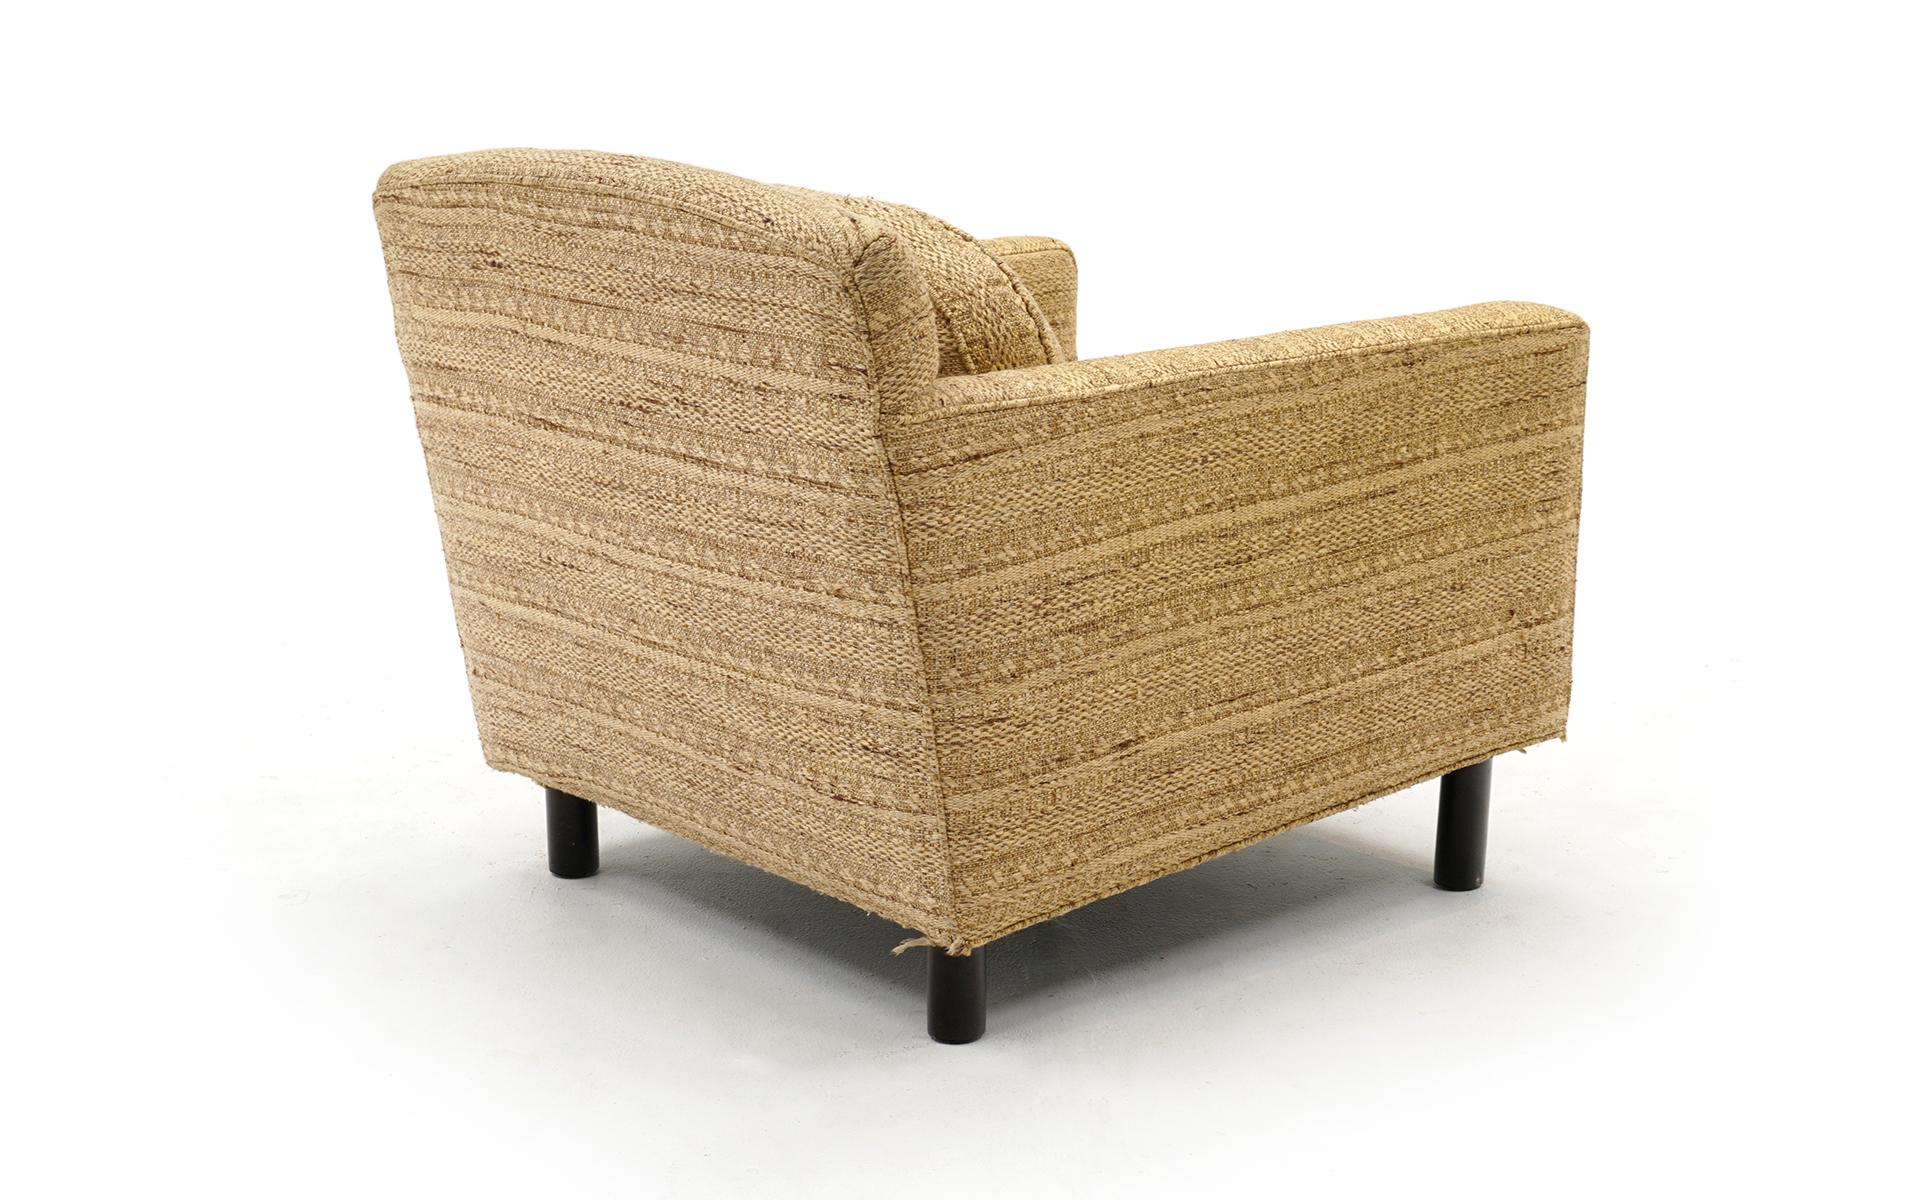 Mid-20th Century Lounge Chair by Edward Wormley for Dunbar Priced to Sell as is for Re-Upholstery